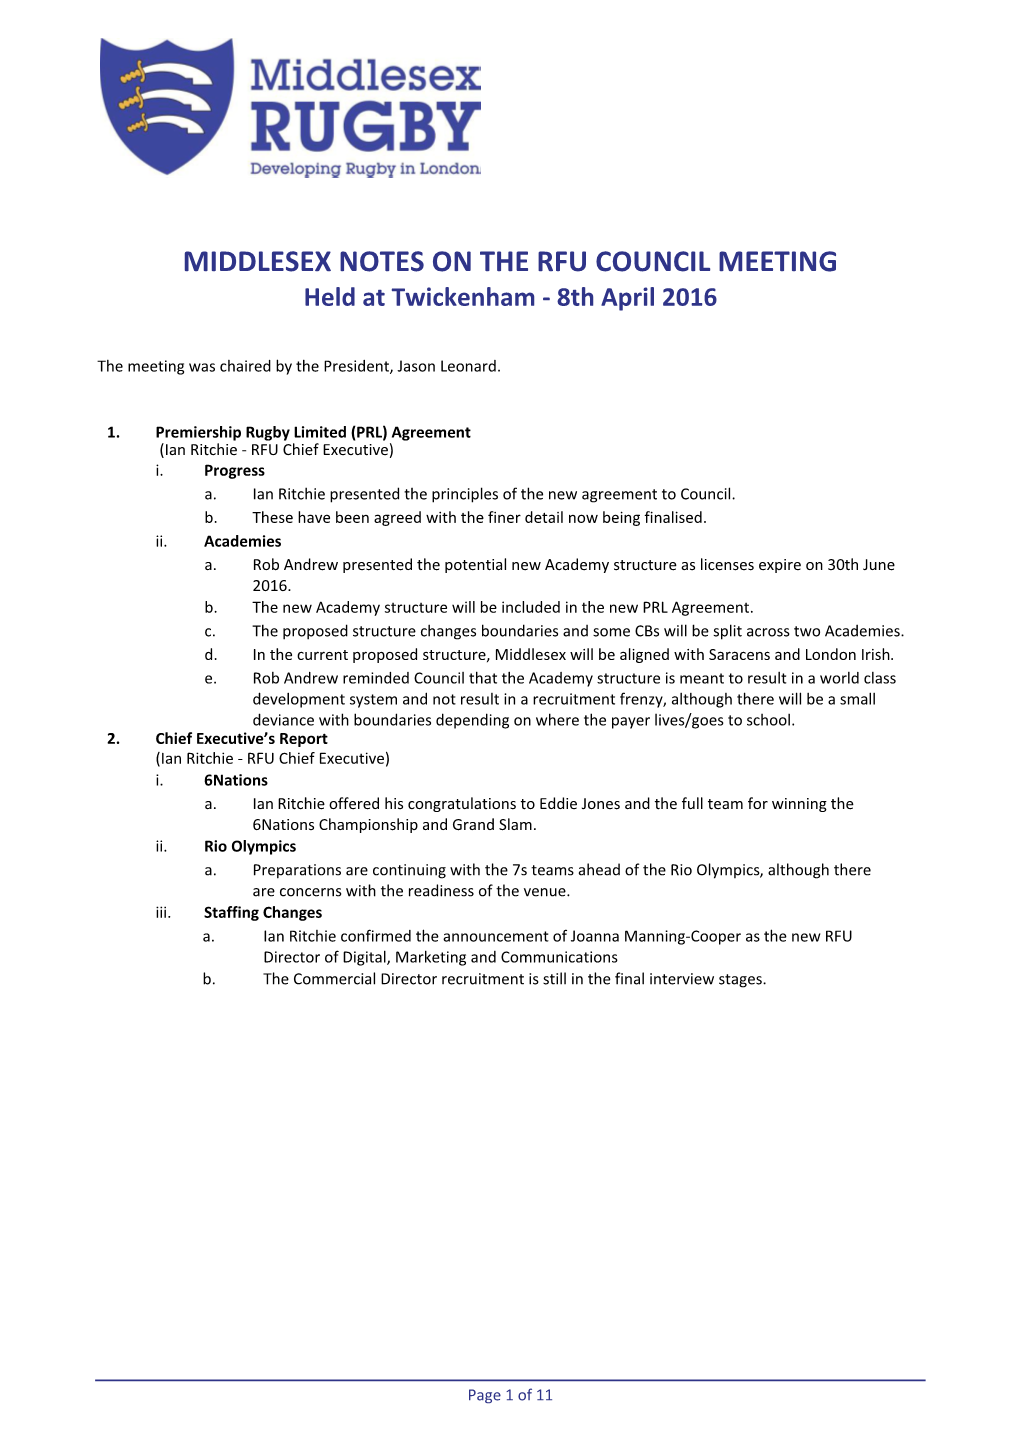 RFU Council Notes Middlesex April 2016